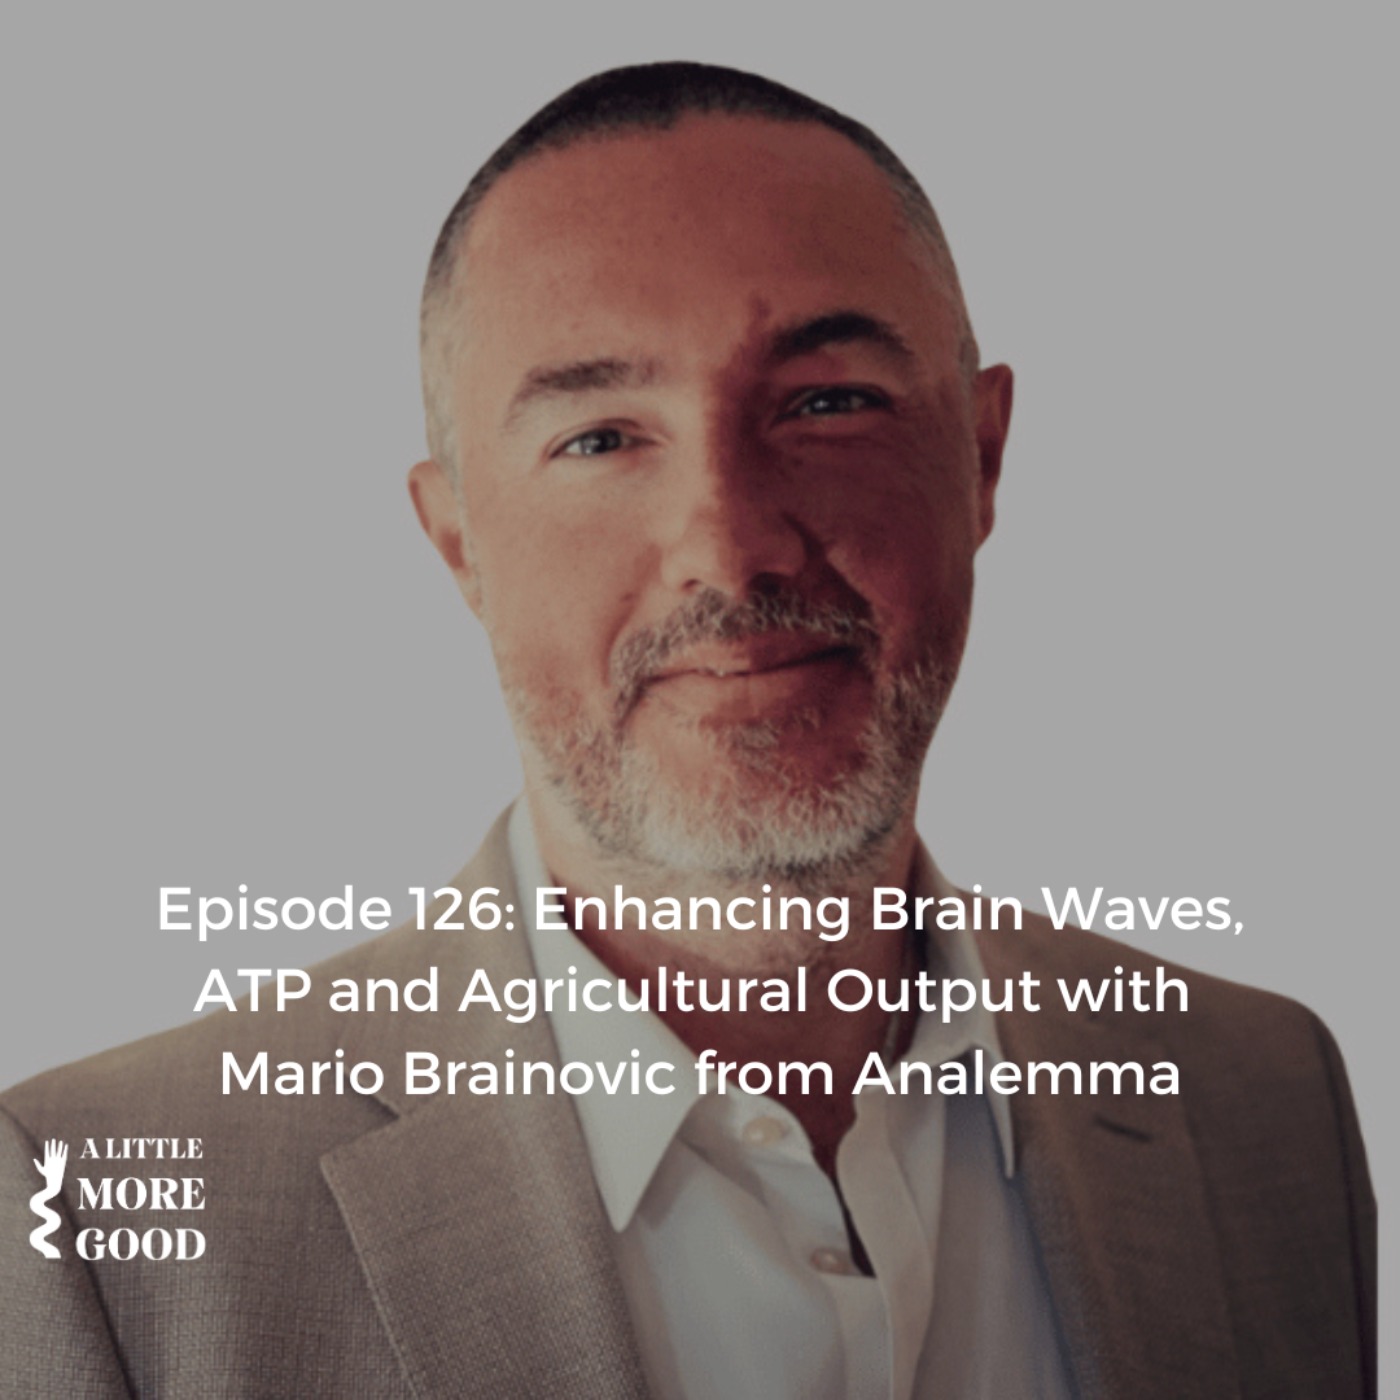 Enhancing Brain Waves, ATP and Agricultural Output with Mario Brainovic from Analemma